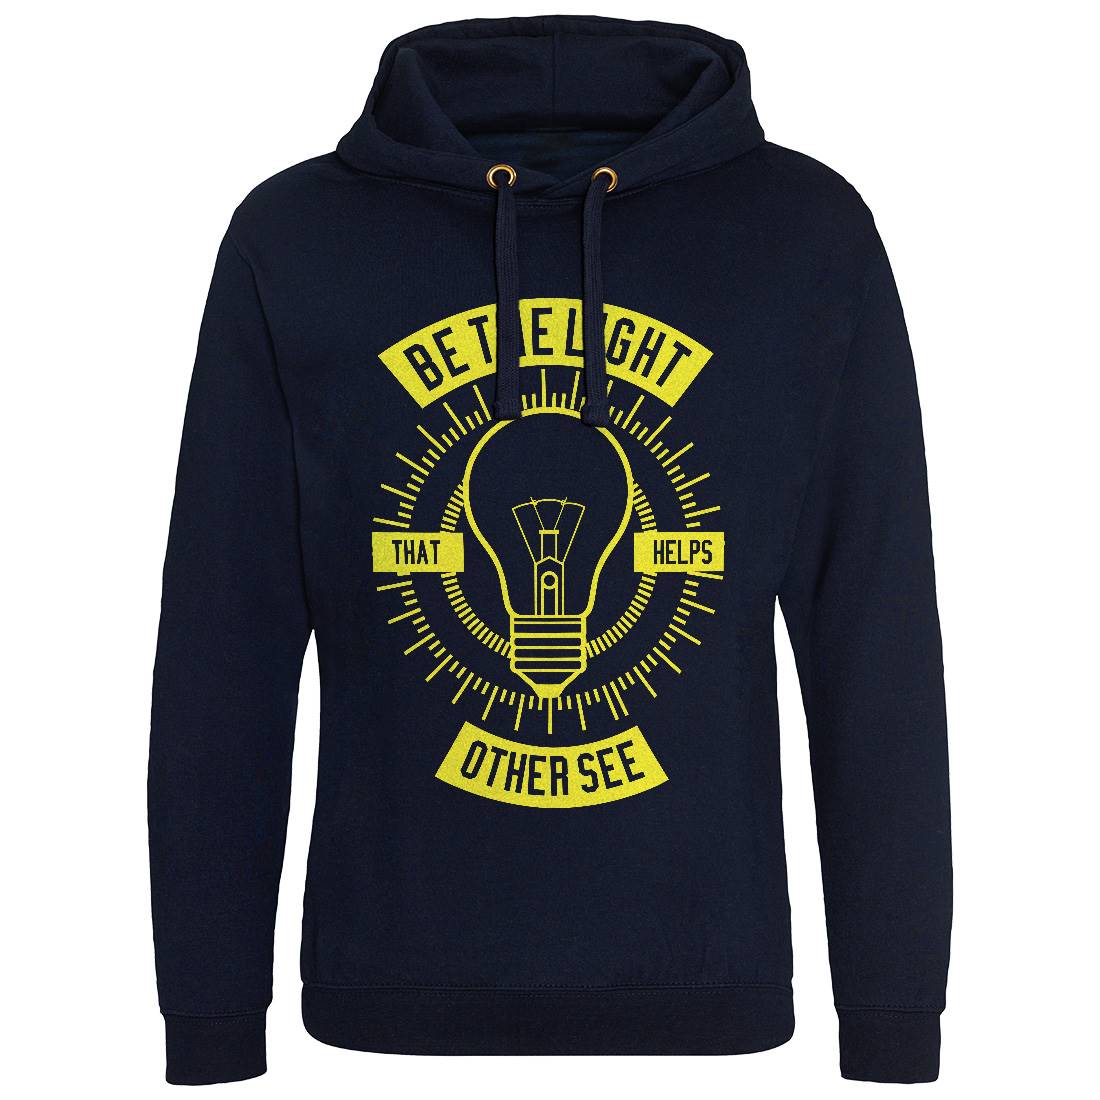 Be The Light Mens Hoodie Without Pocket Quotes A206